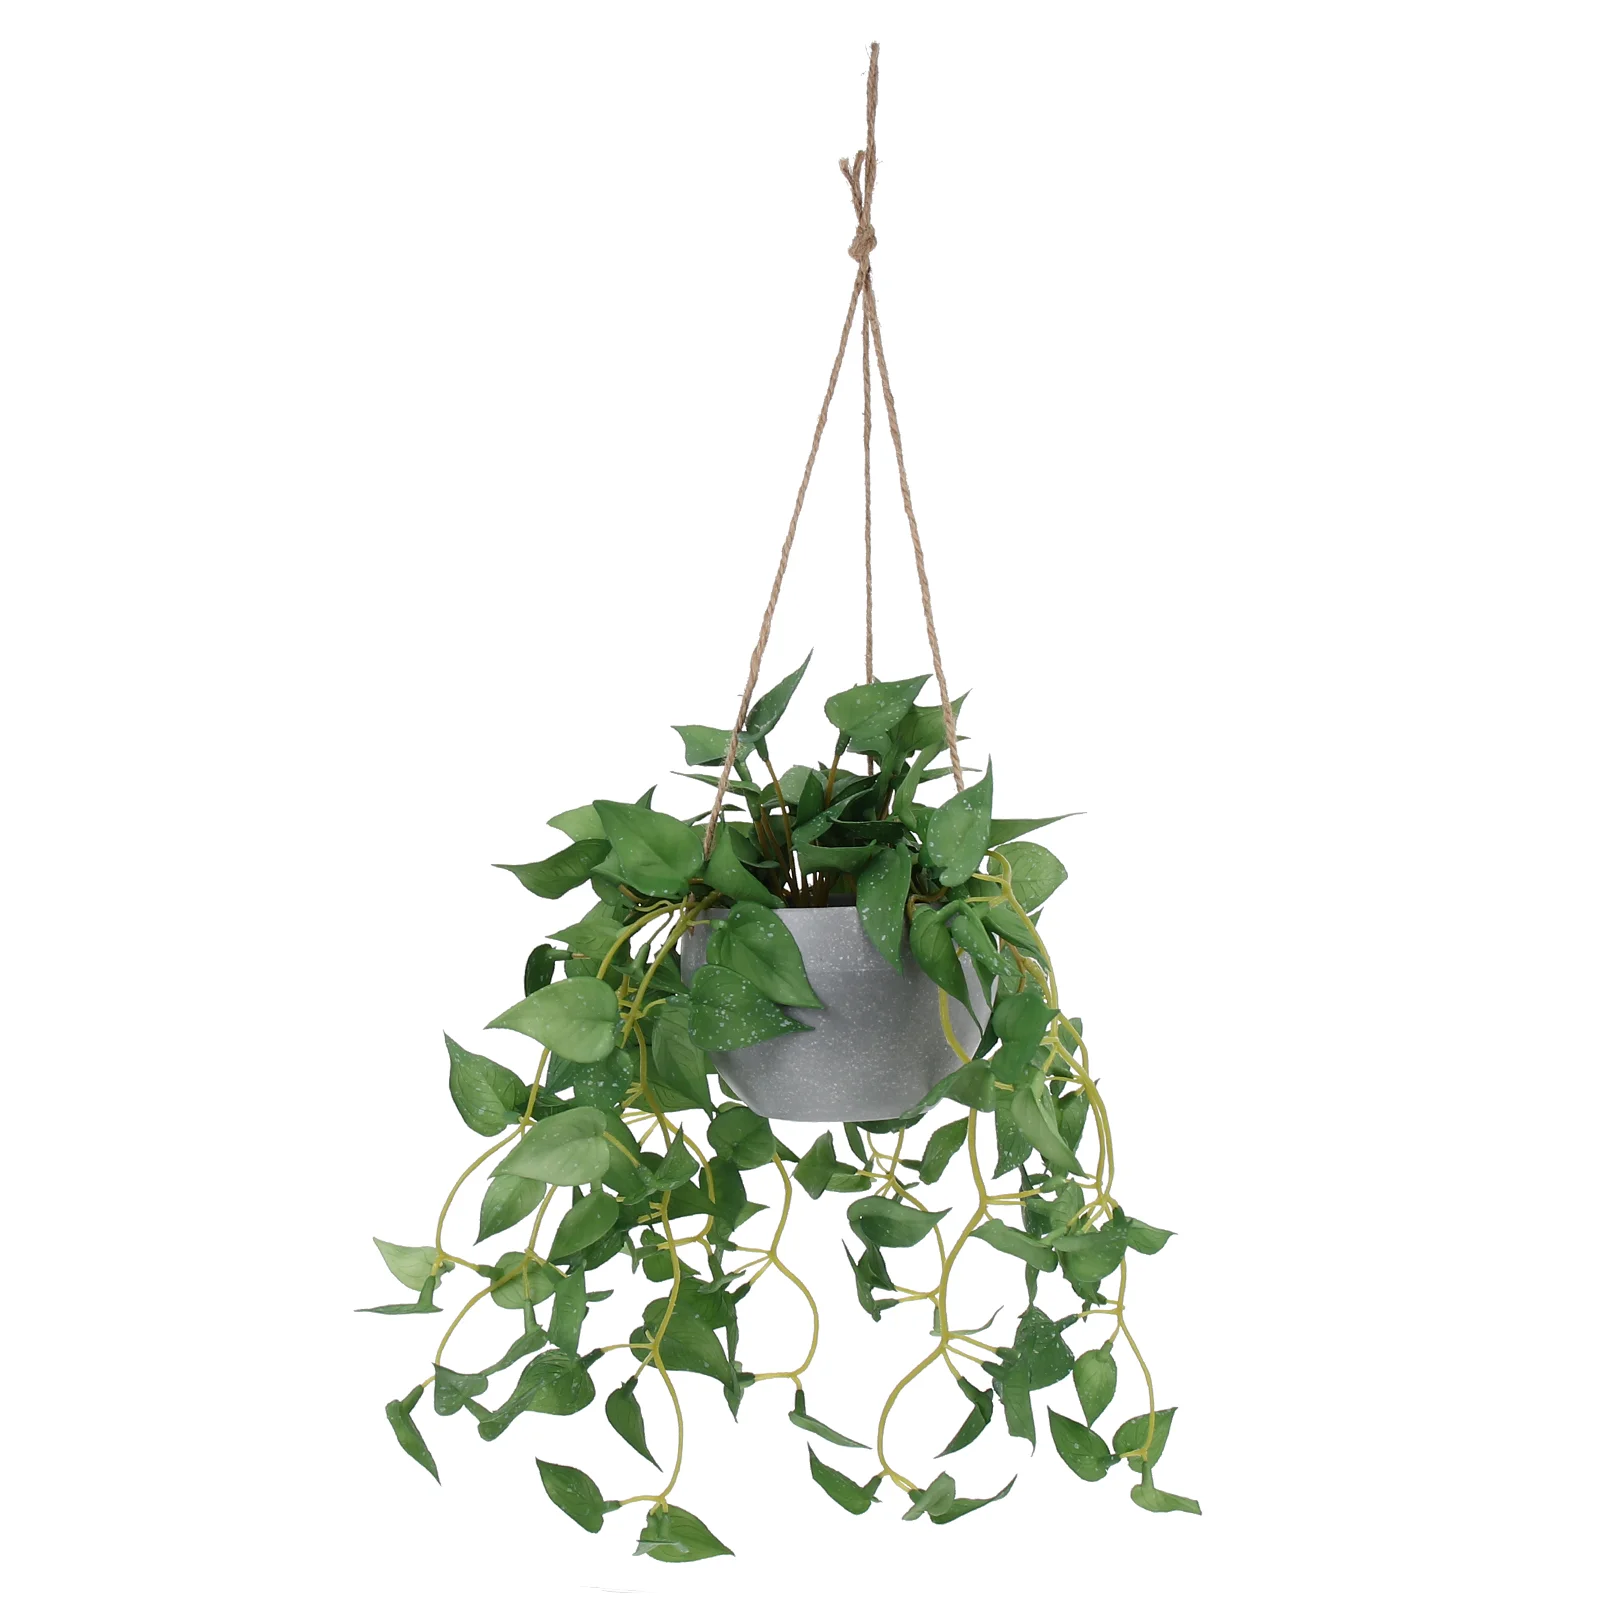 

Hanging Planter Indoor Simulated Green Dill Party Decor Delicate Fake Rattan Faux Pendant 22X20cm Wall Plastic Vine Adornment